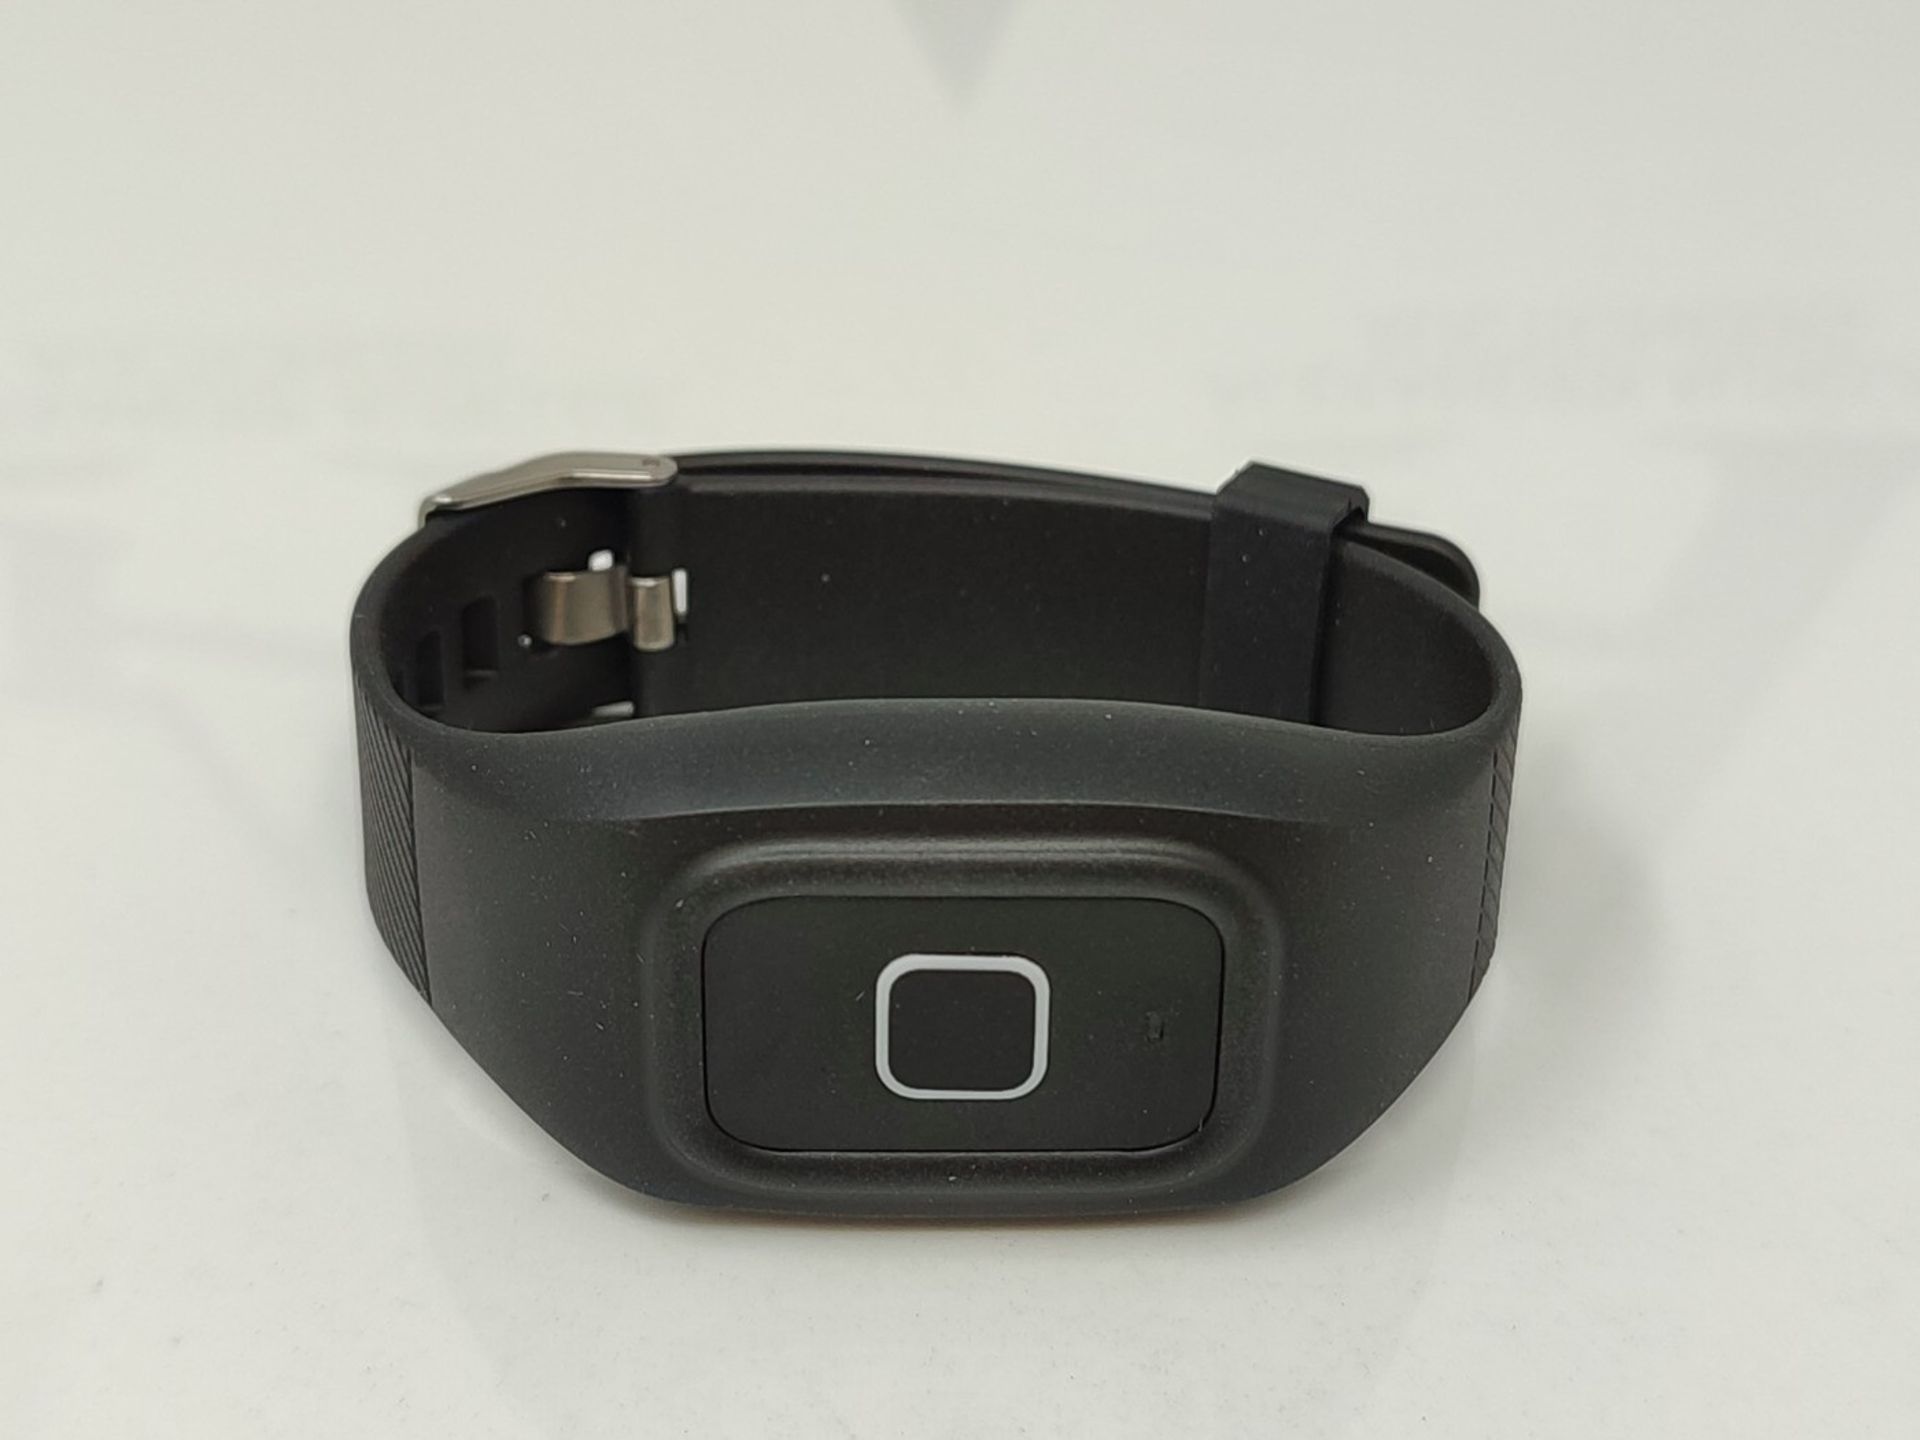 Maxcom FW735 - Emergency bracelet for older people, adults, with SOS emergency button, - Image 4 of 4